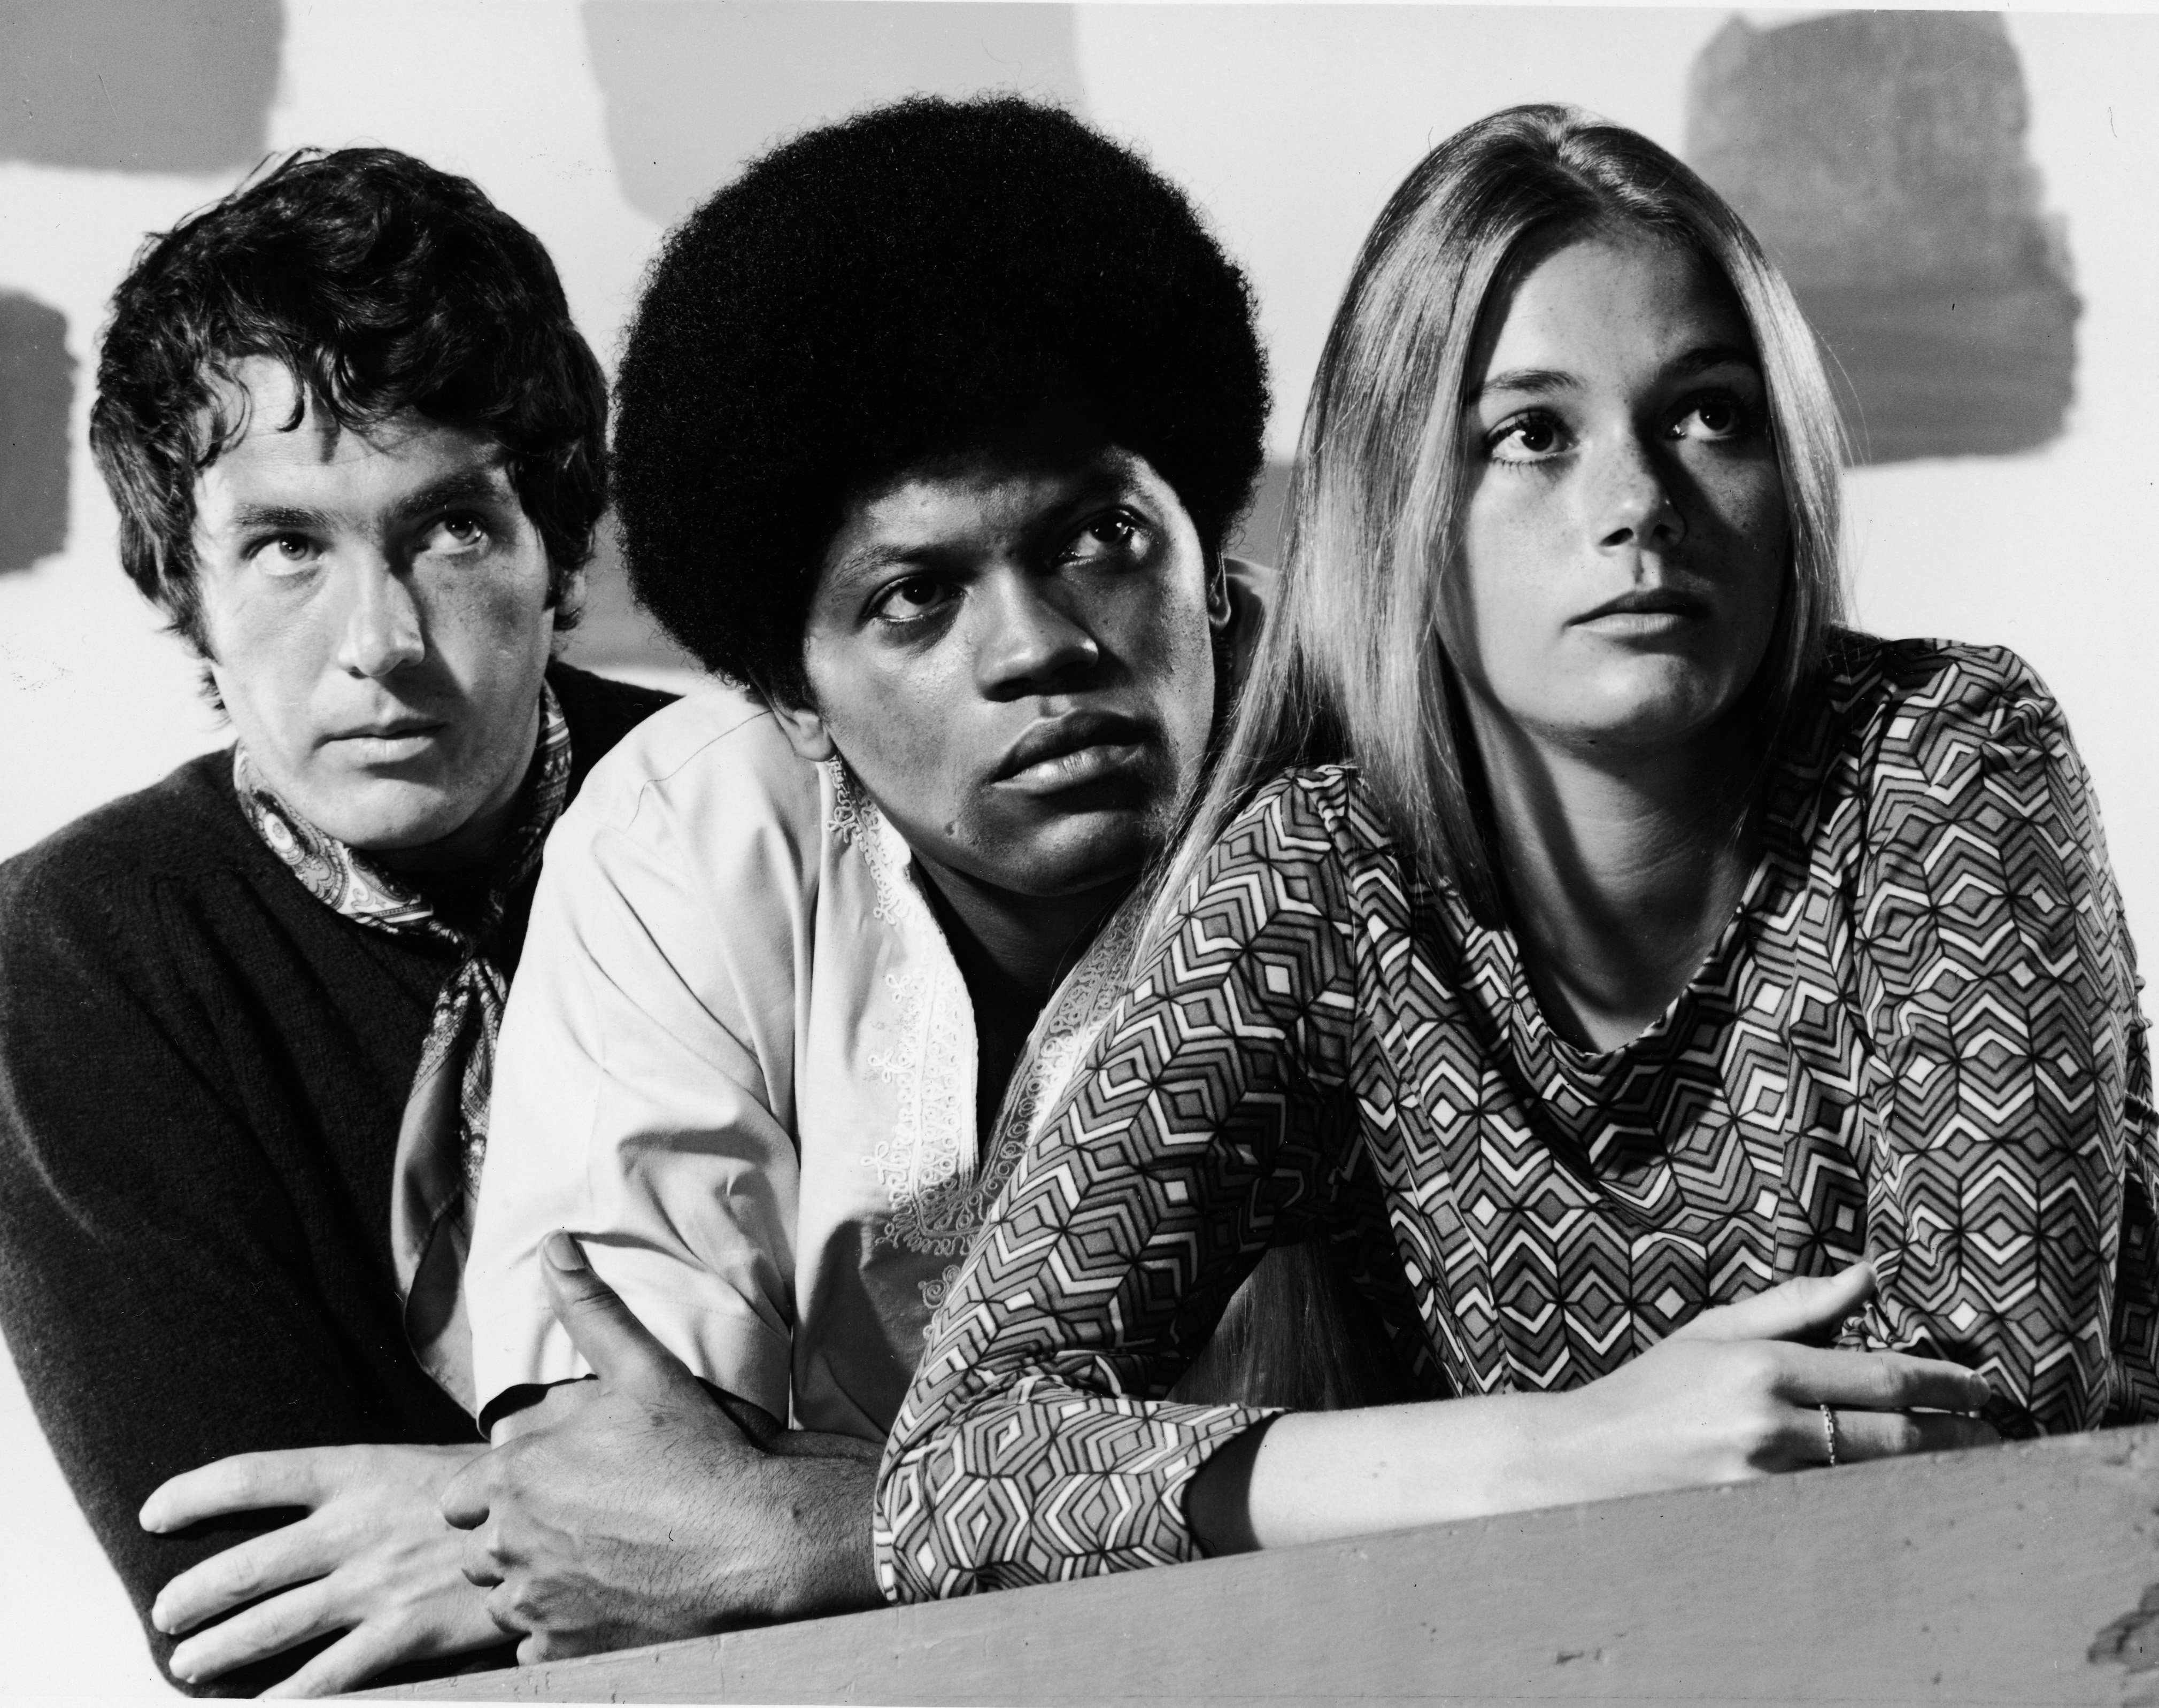 Peggy Lipton posing with Michael Cole and Clarence Williams III for the show "The Mod Squad" in 1968. | Photo: Getty Images